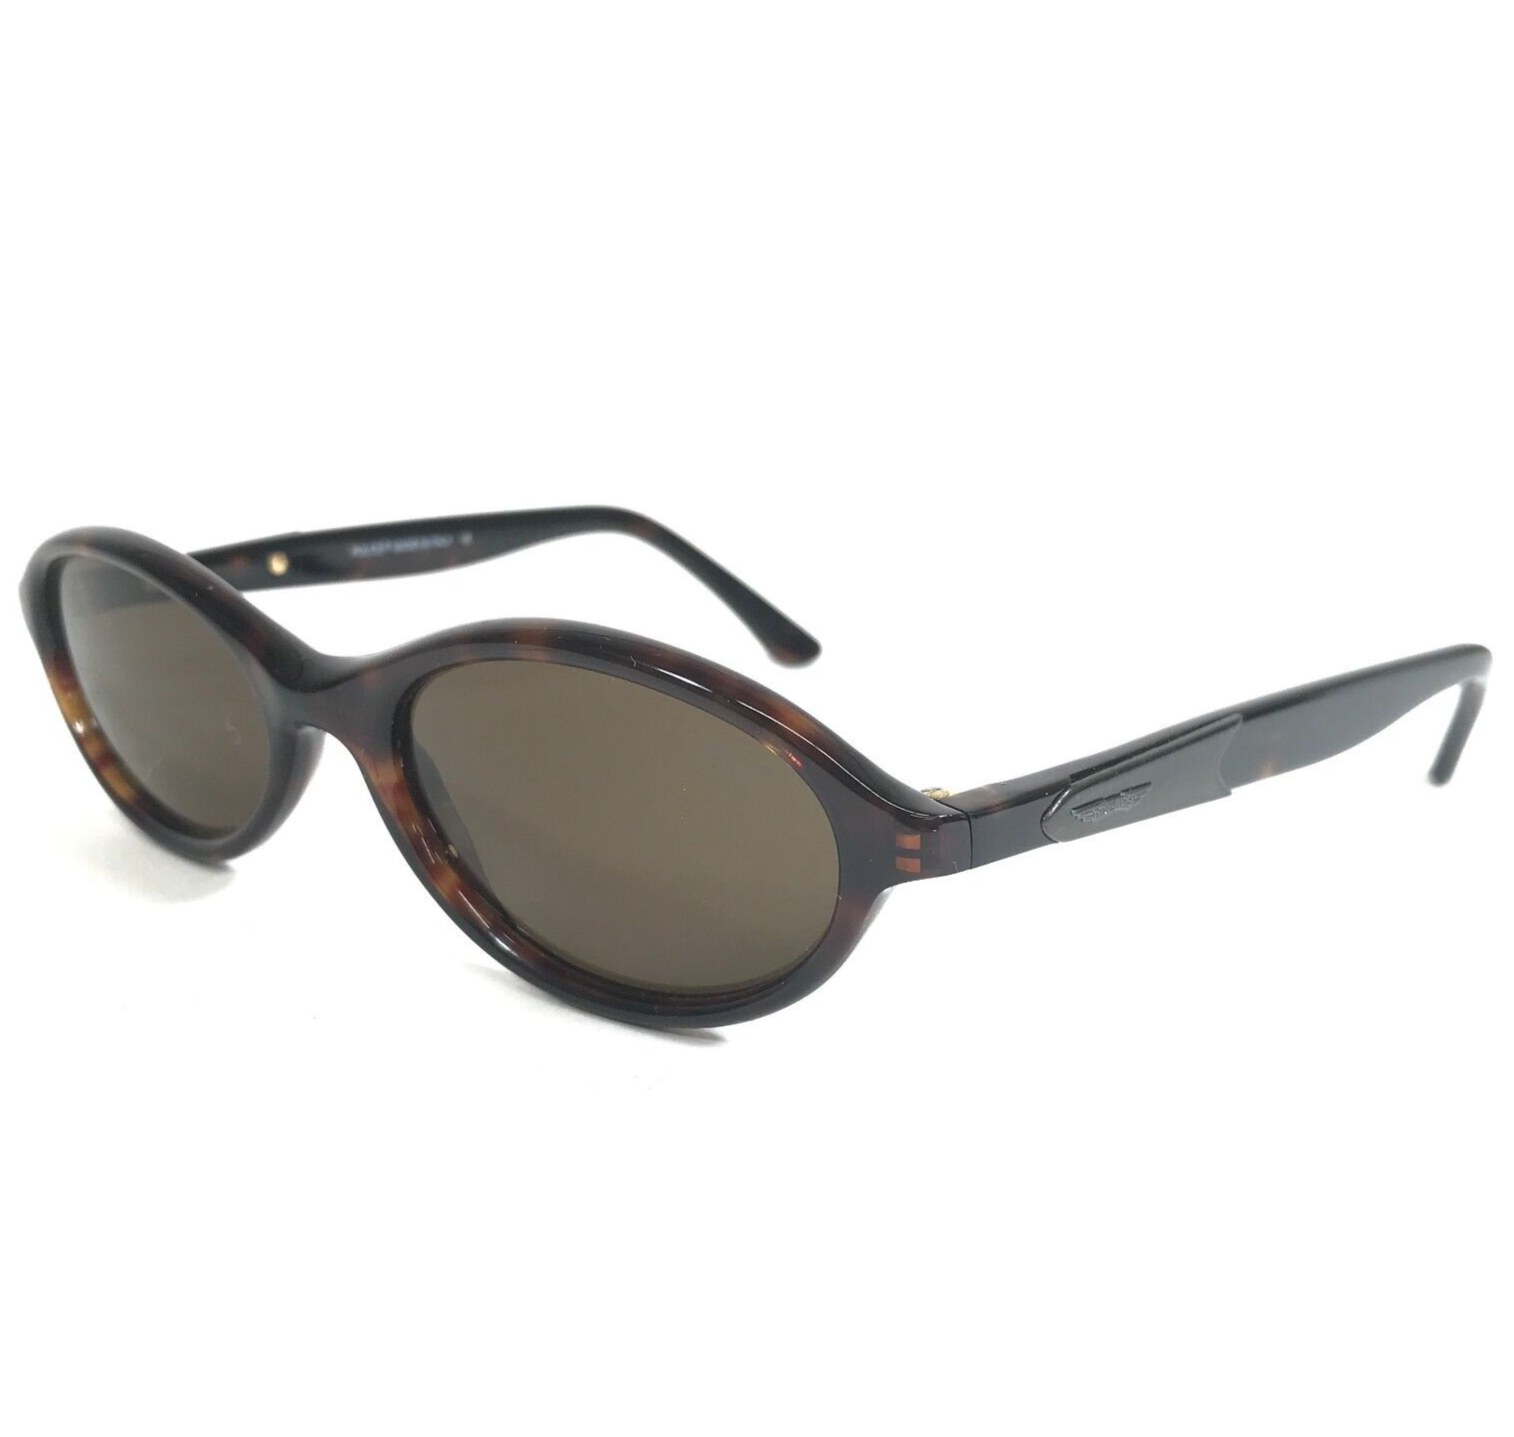 Primary image for Police Sunglasses MOD.1263 COL.722 Tortoise Gray Round Frames with Brown Lenses